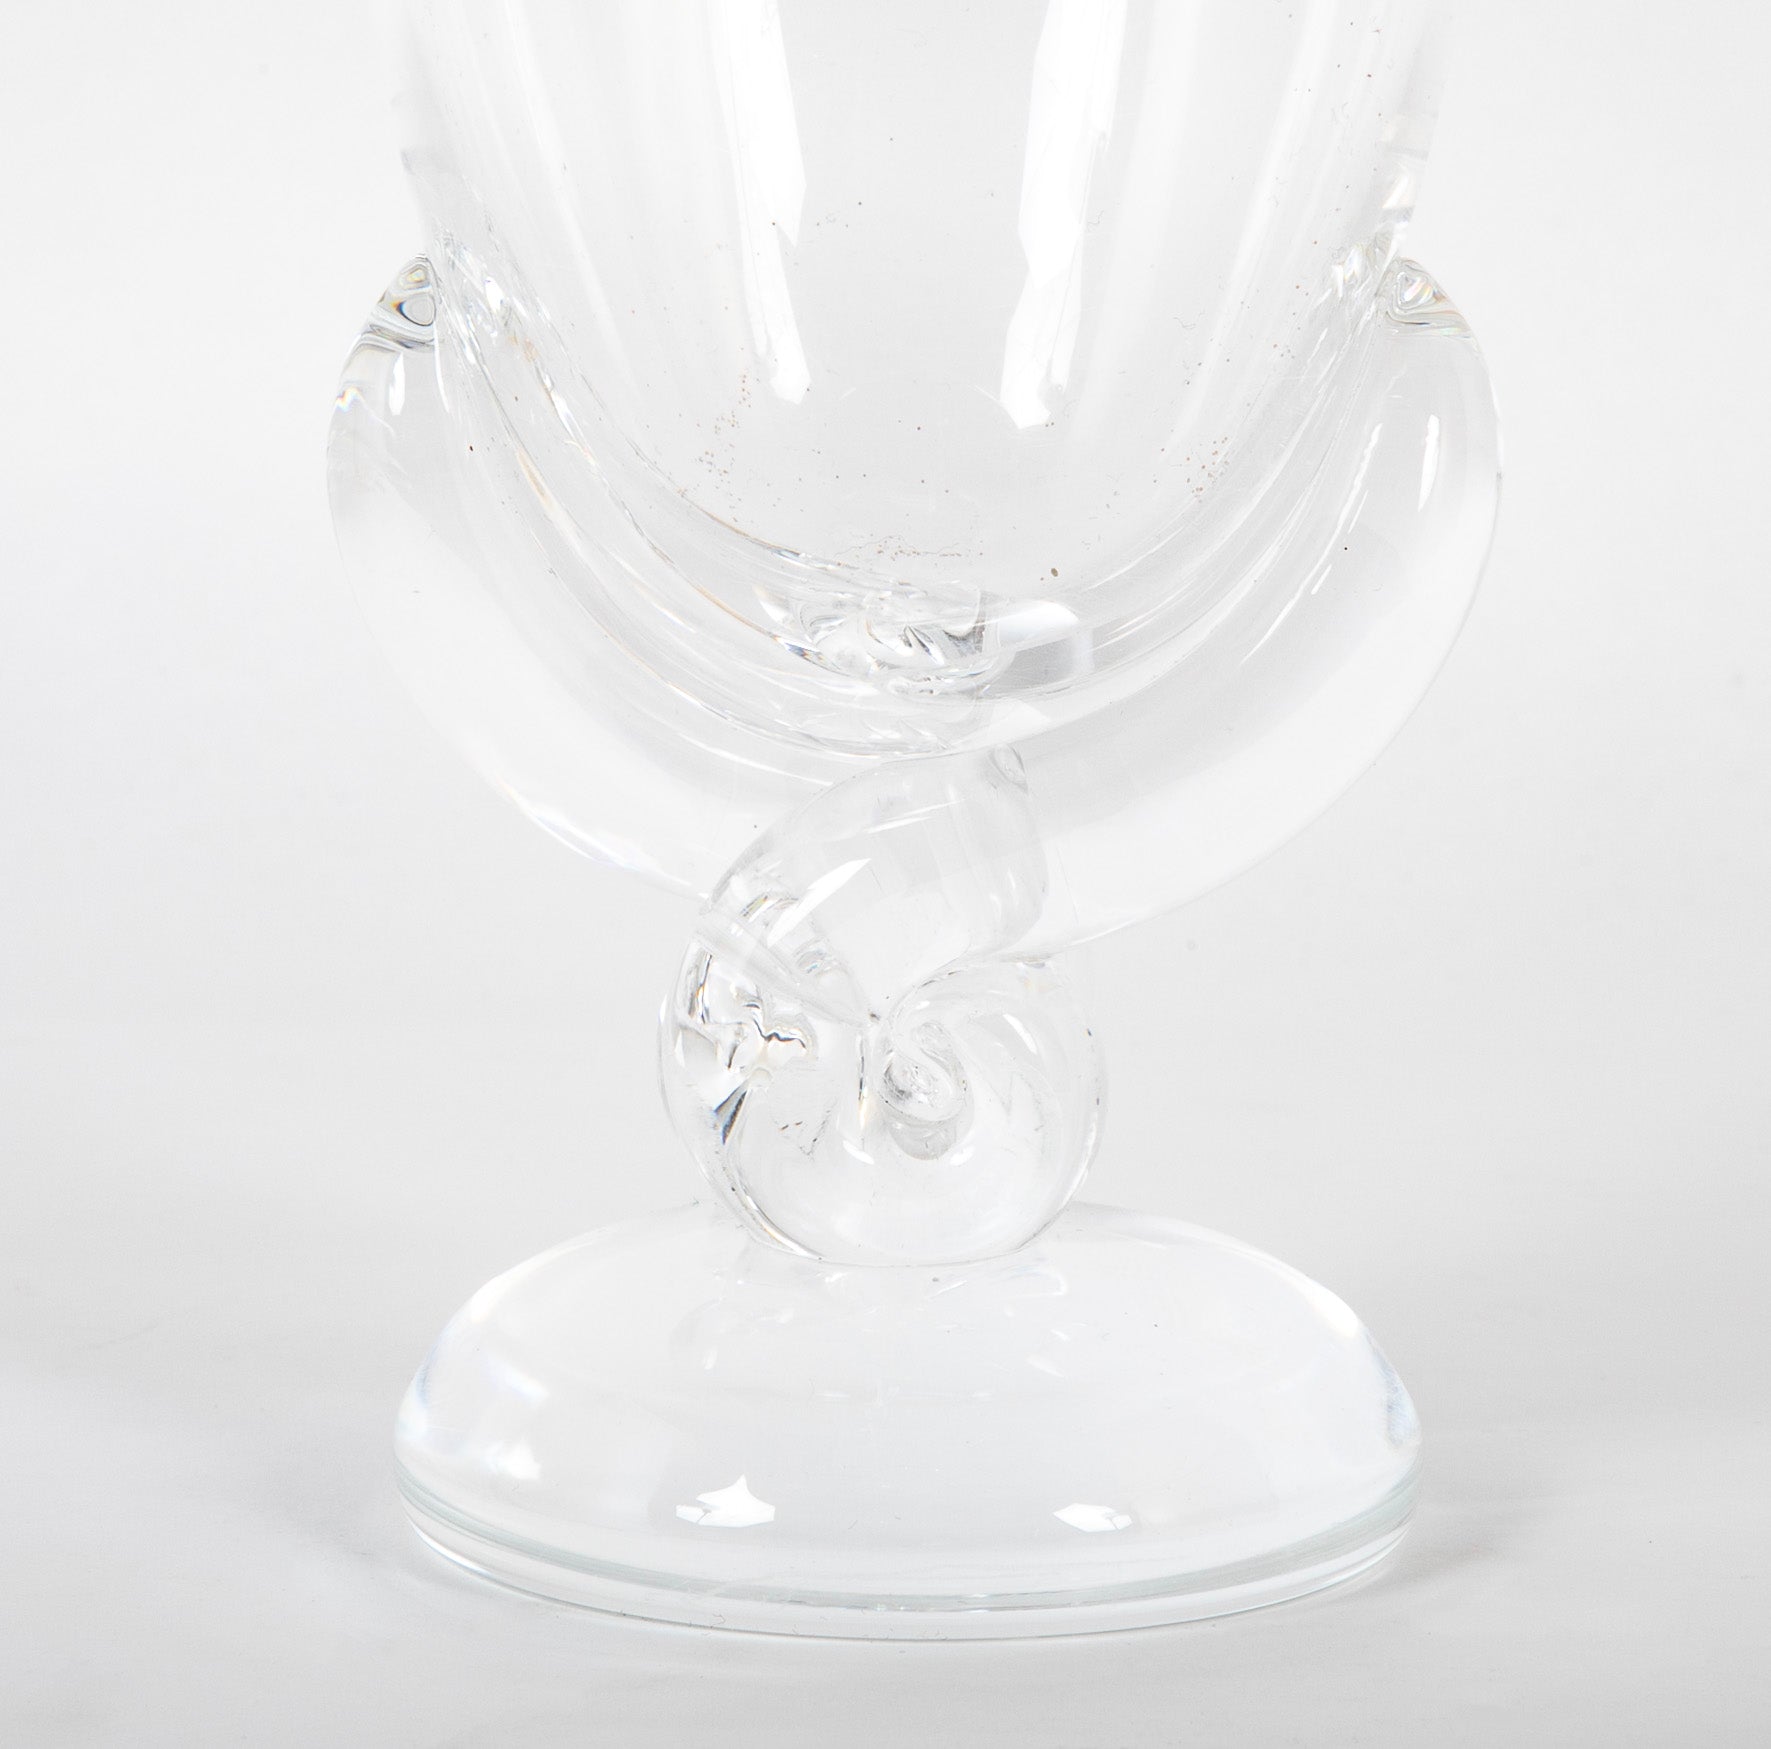 Steuben Glass Vase with Scrolled Circular Base Designed by George Thomas